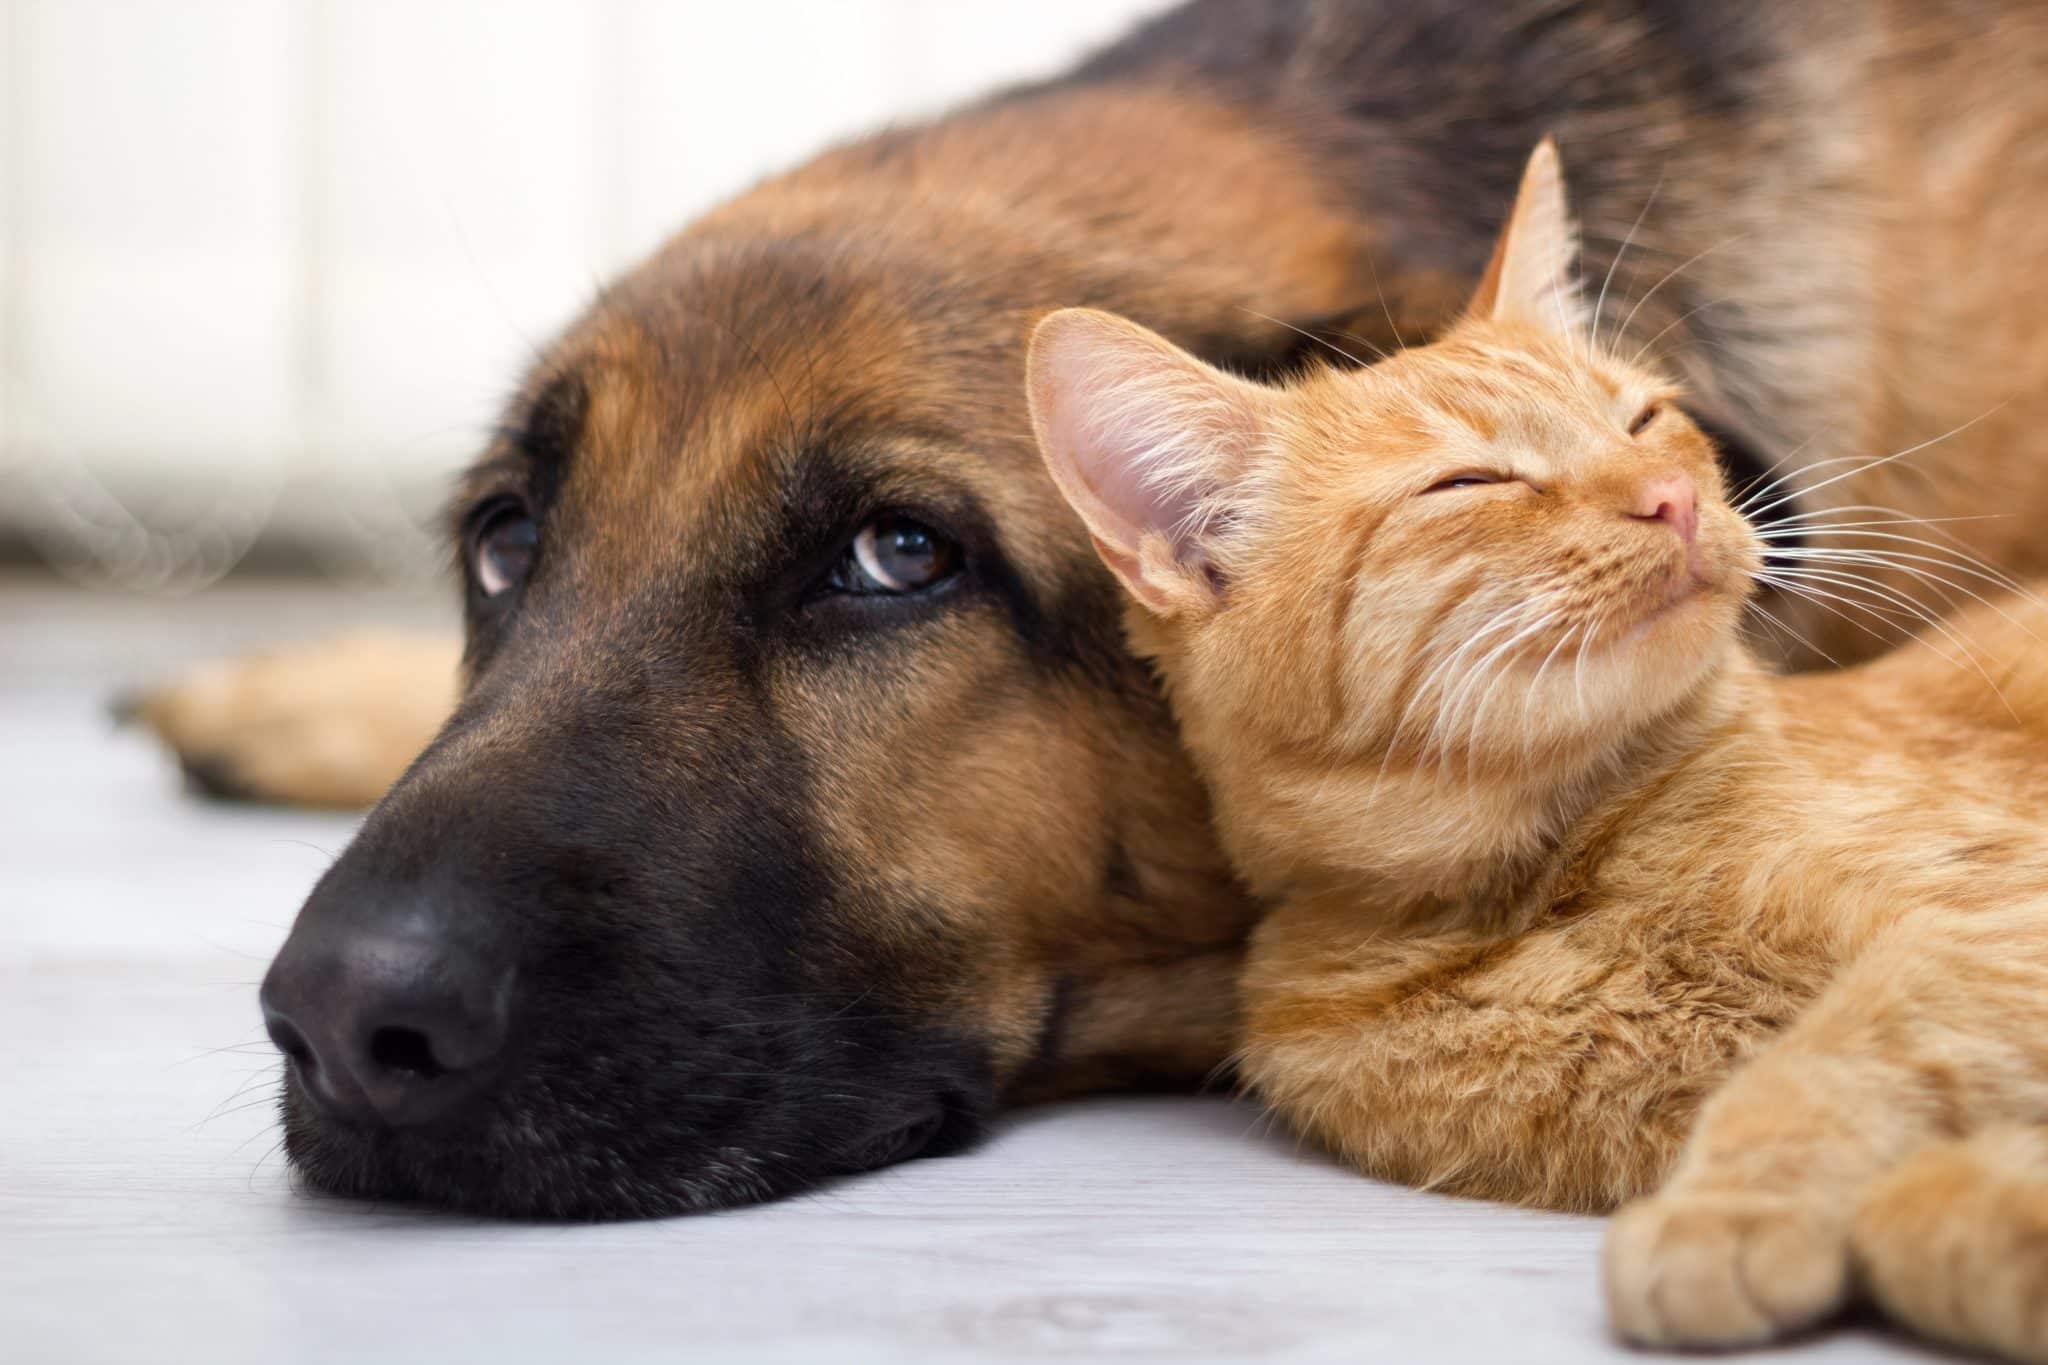 Dog and cat lying together comfortably